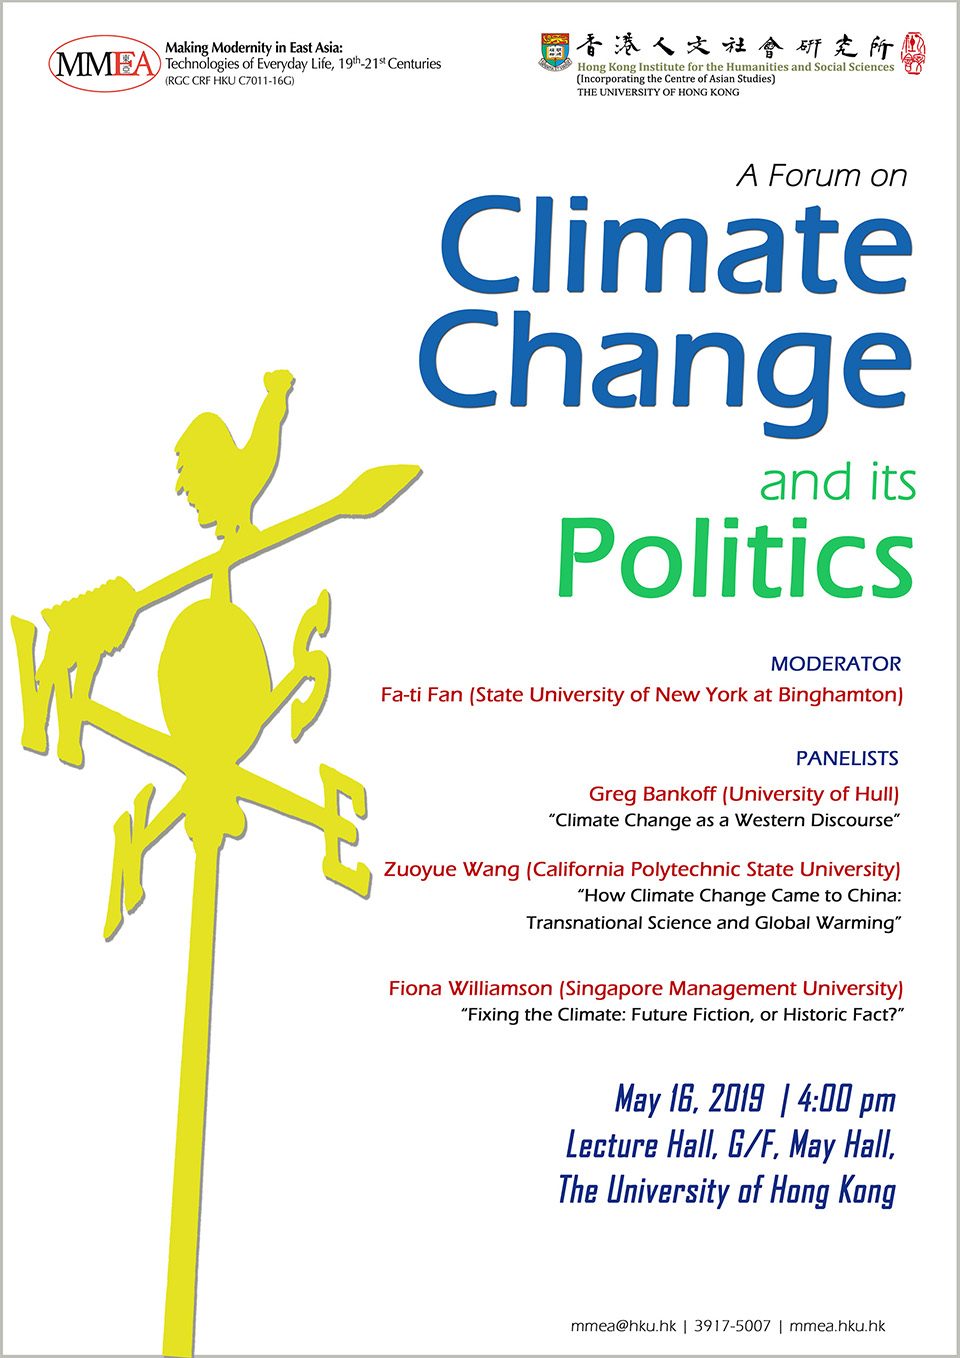 A Forum on “Climate Change and its Politics” (May 26, 2019)